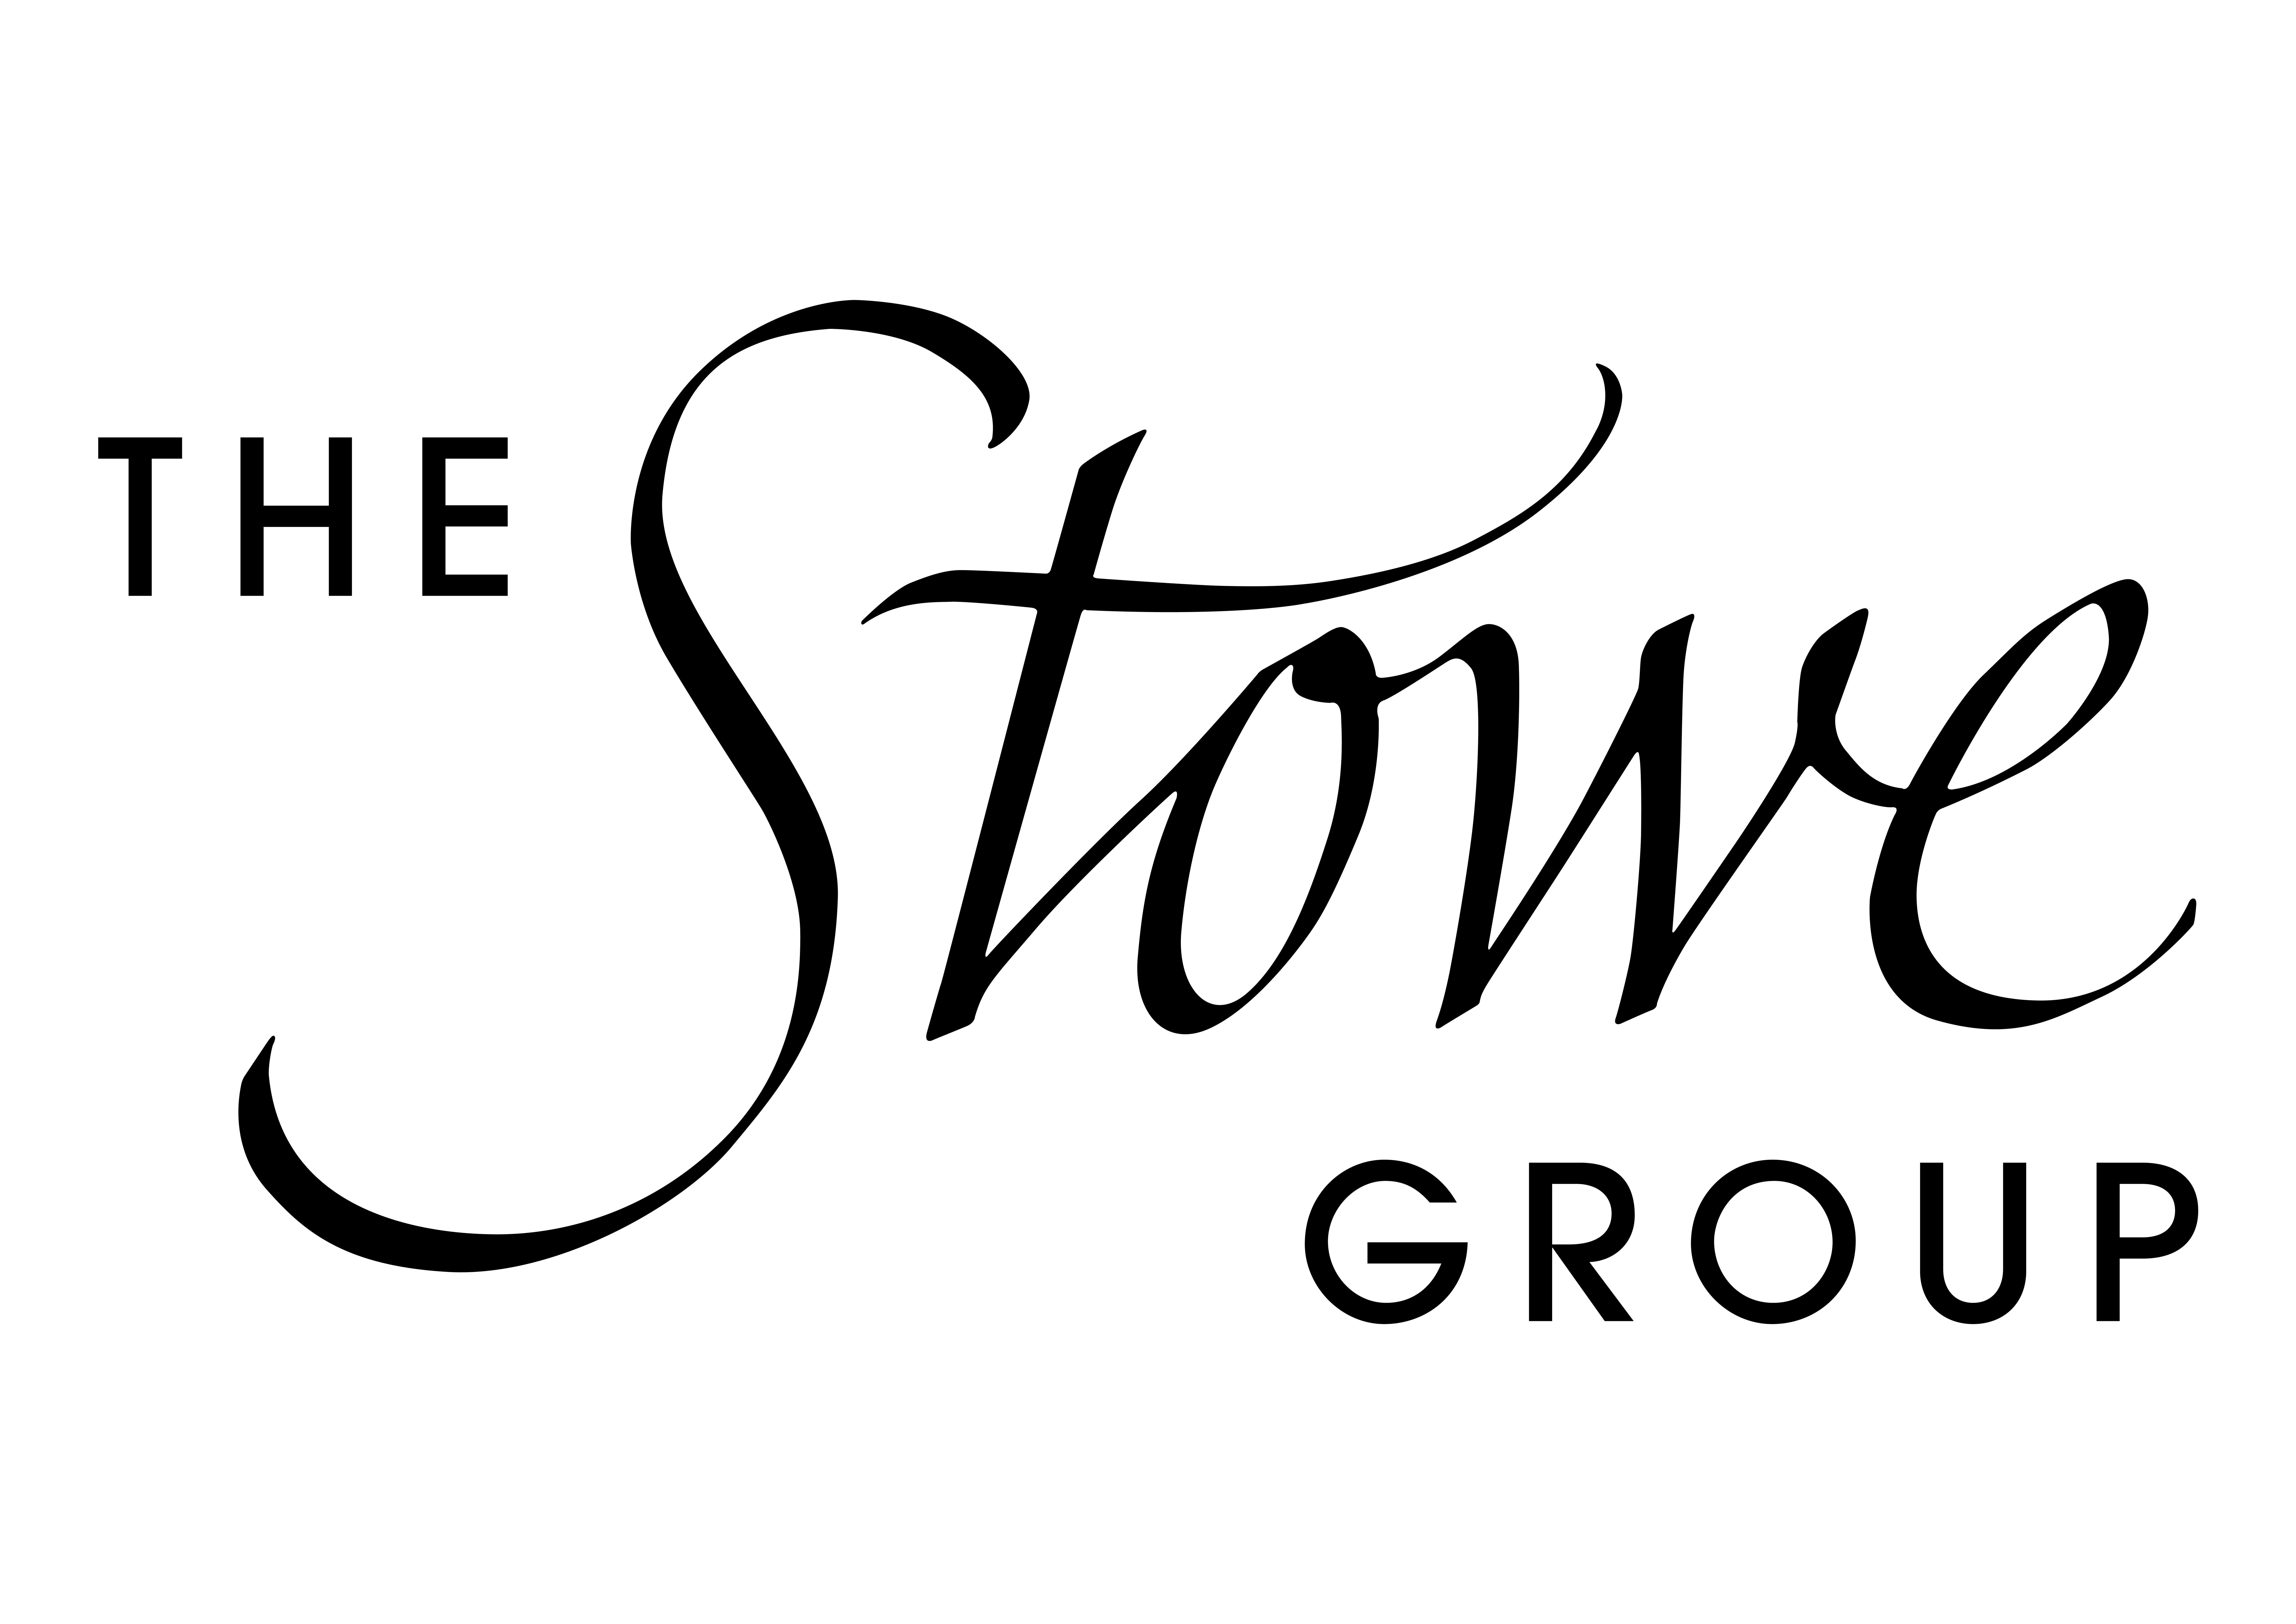 The Stowe Group